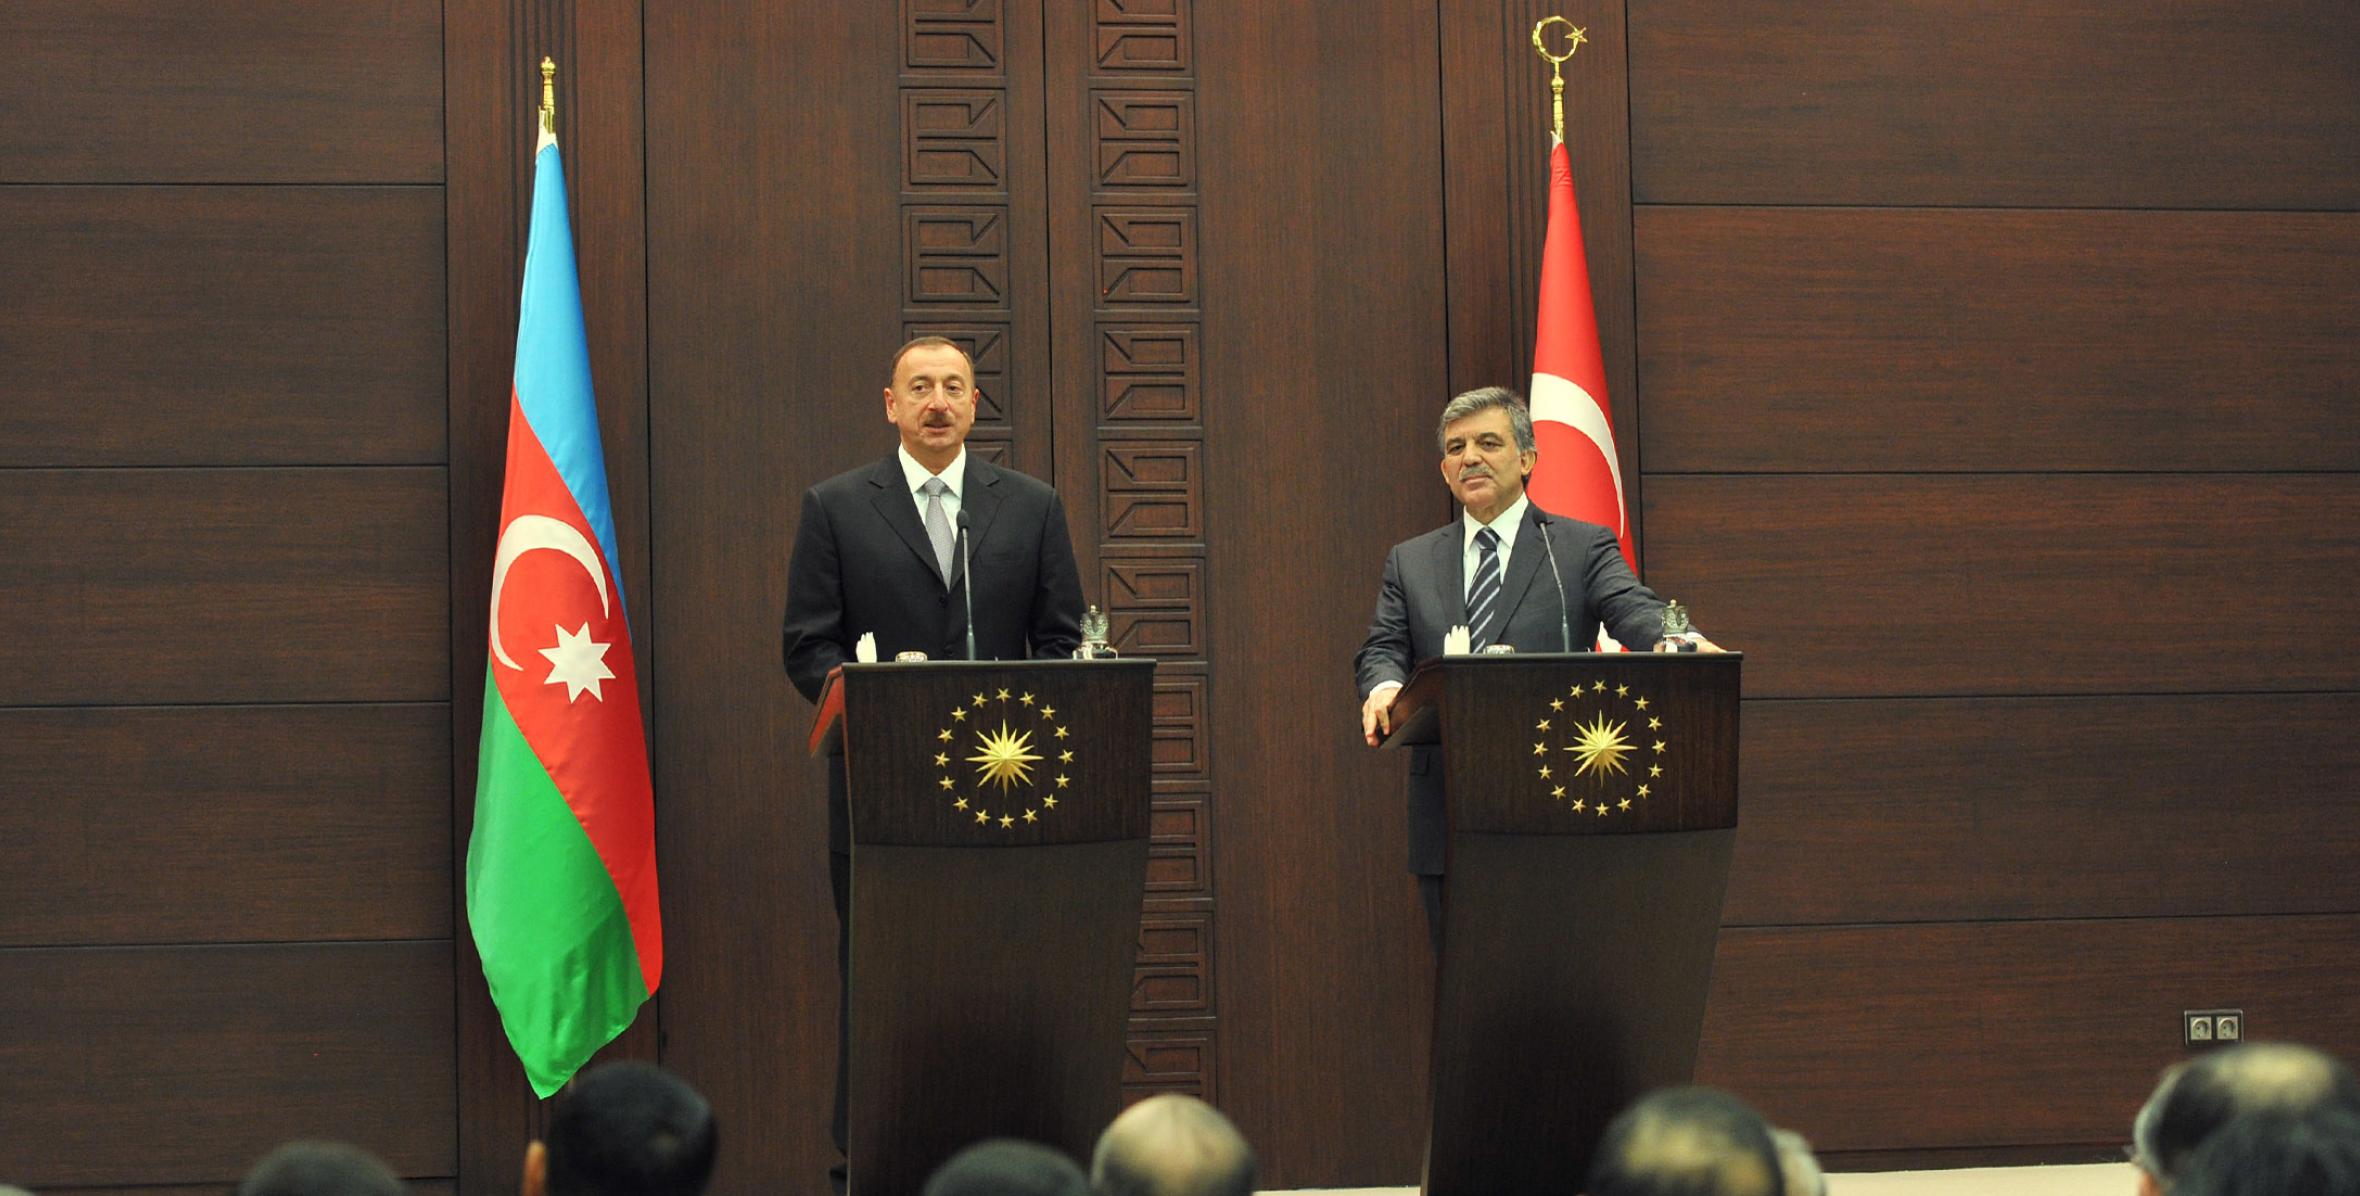 Ilham Aliyev and President Abdullah Gul made a statement to the press